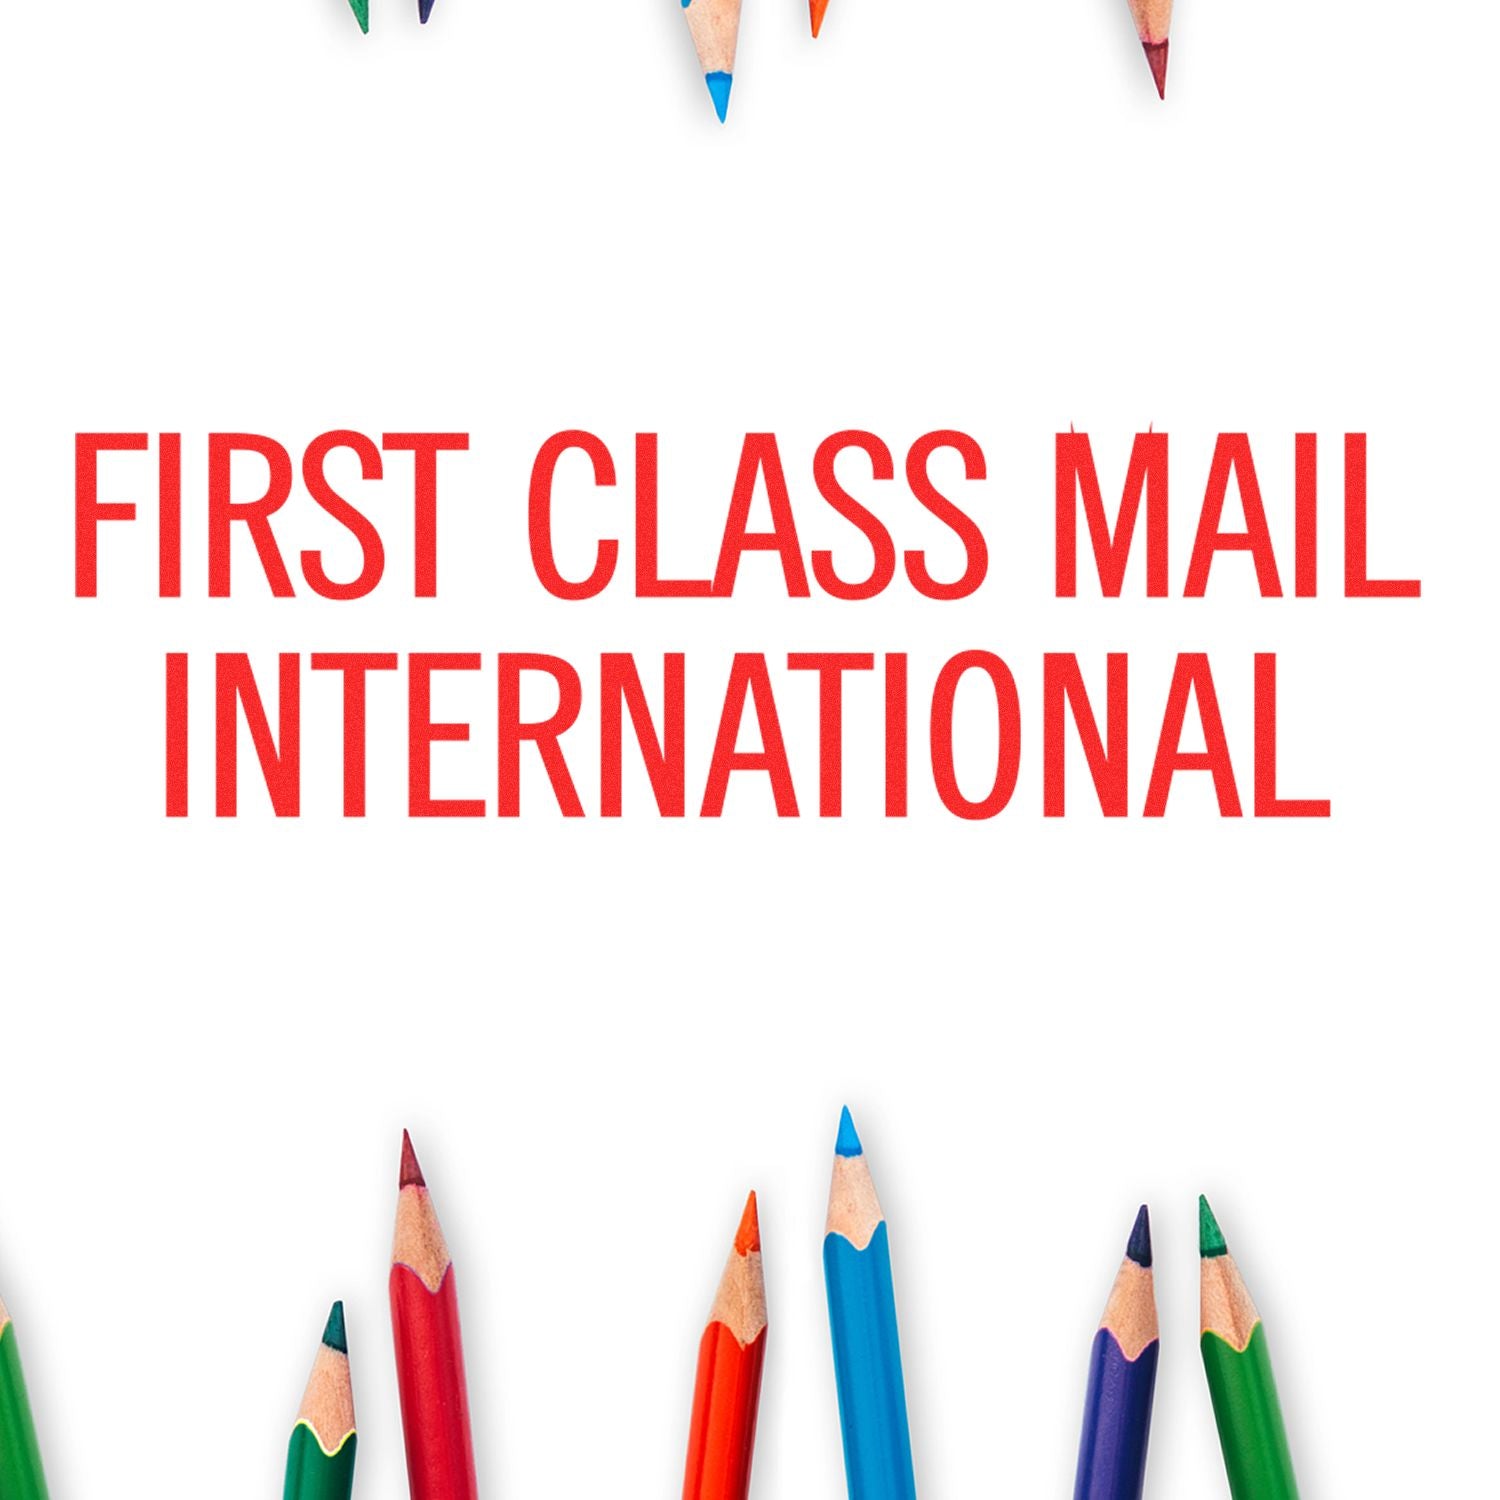 Large Self-Inking First Class Mail International Stamp In Use Photo